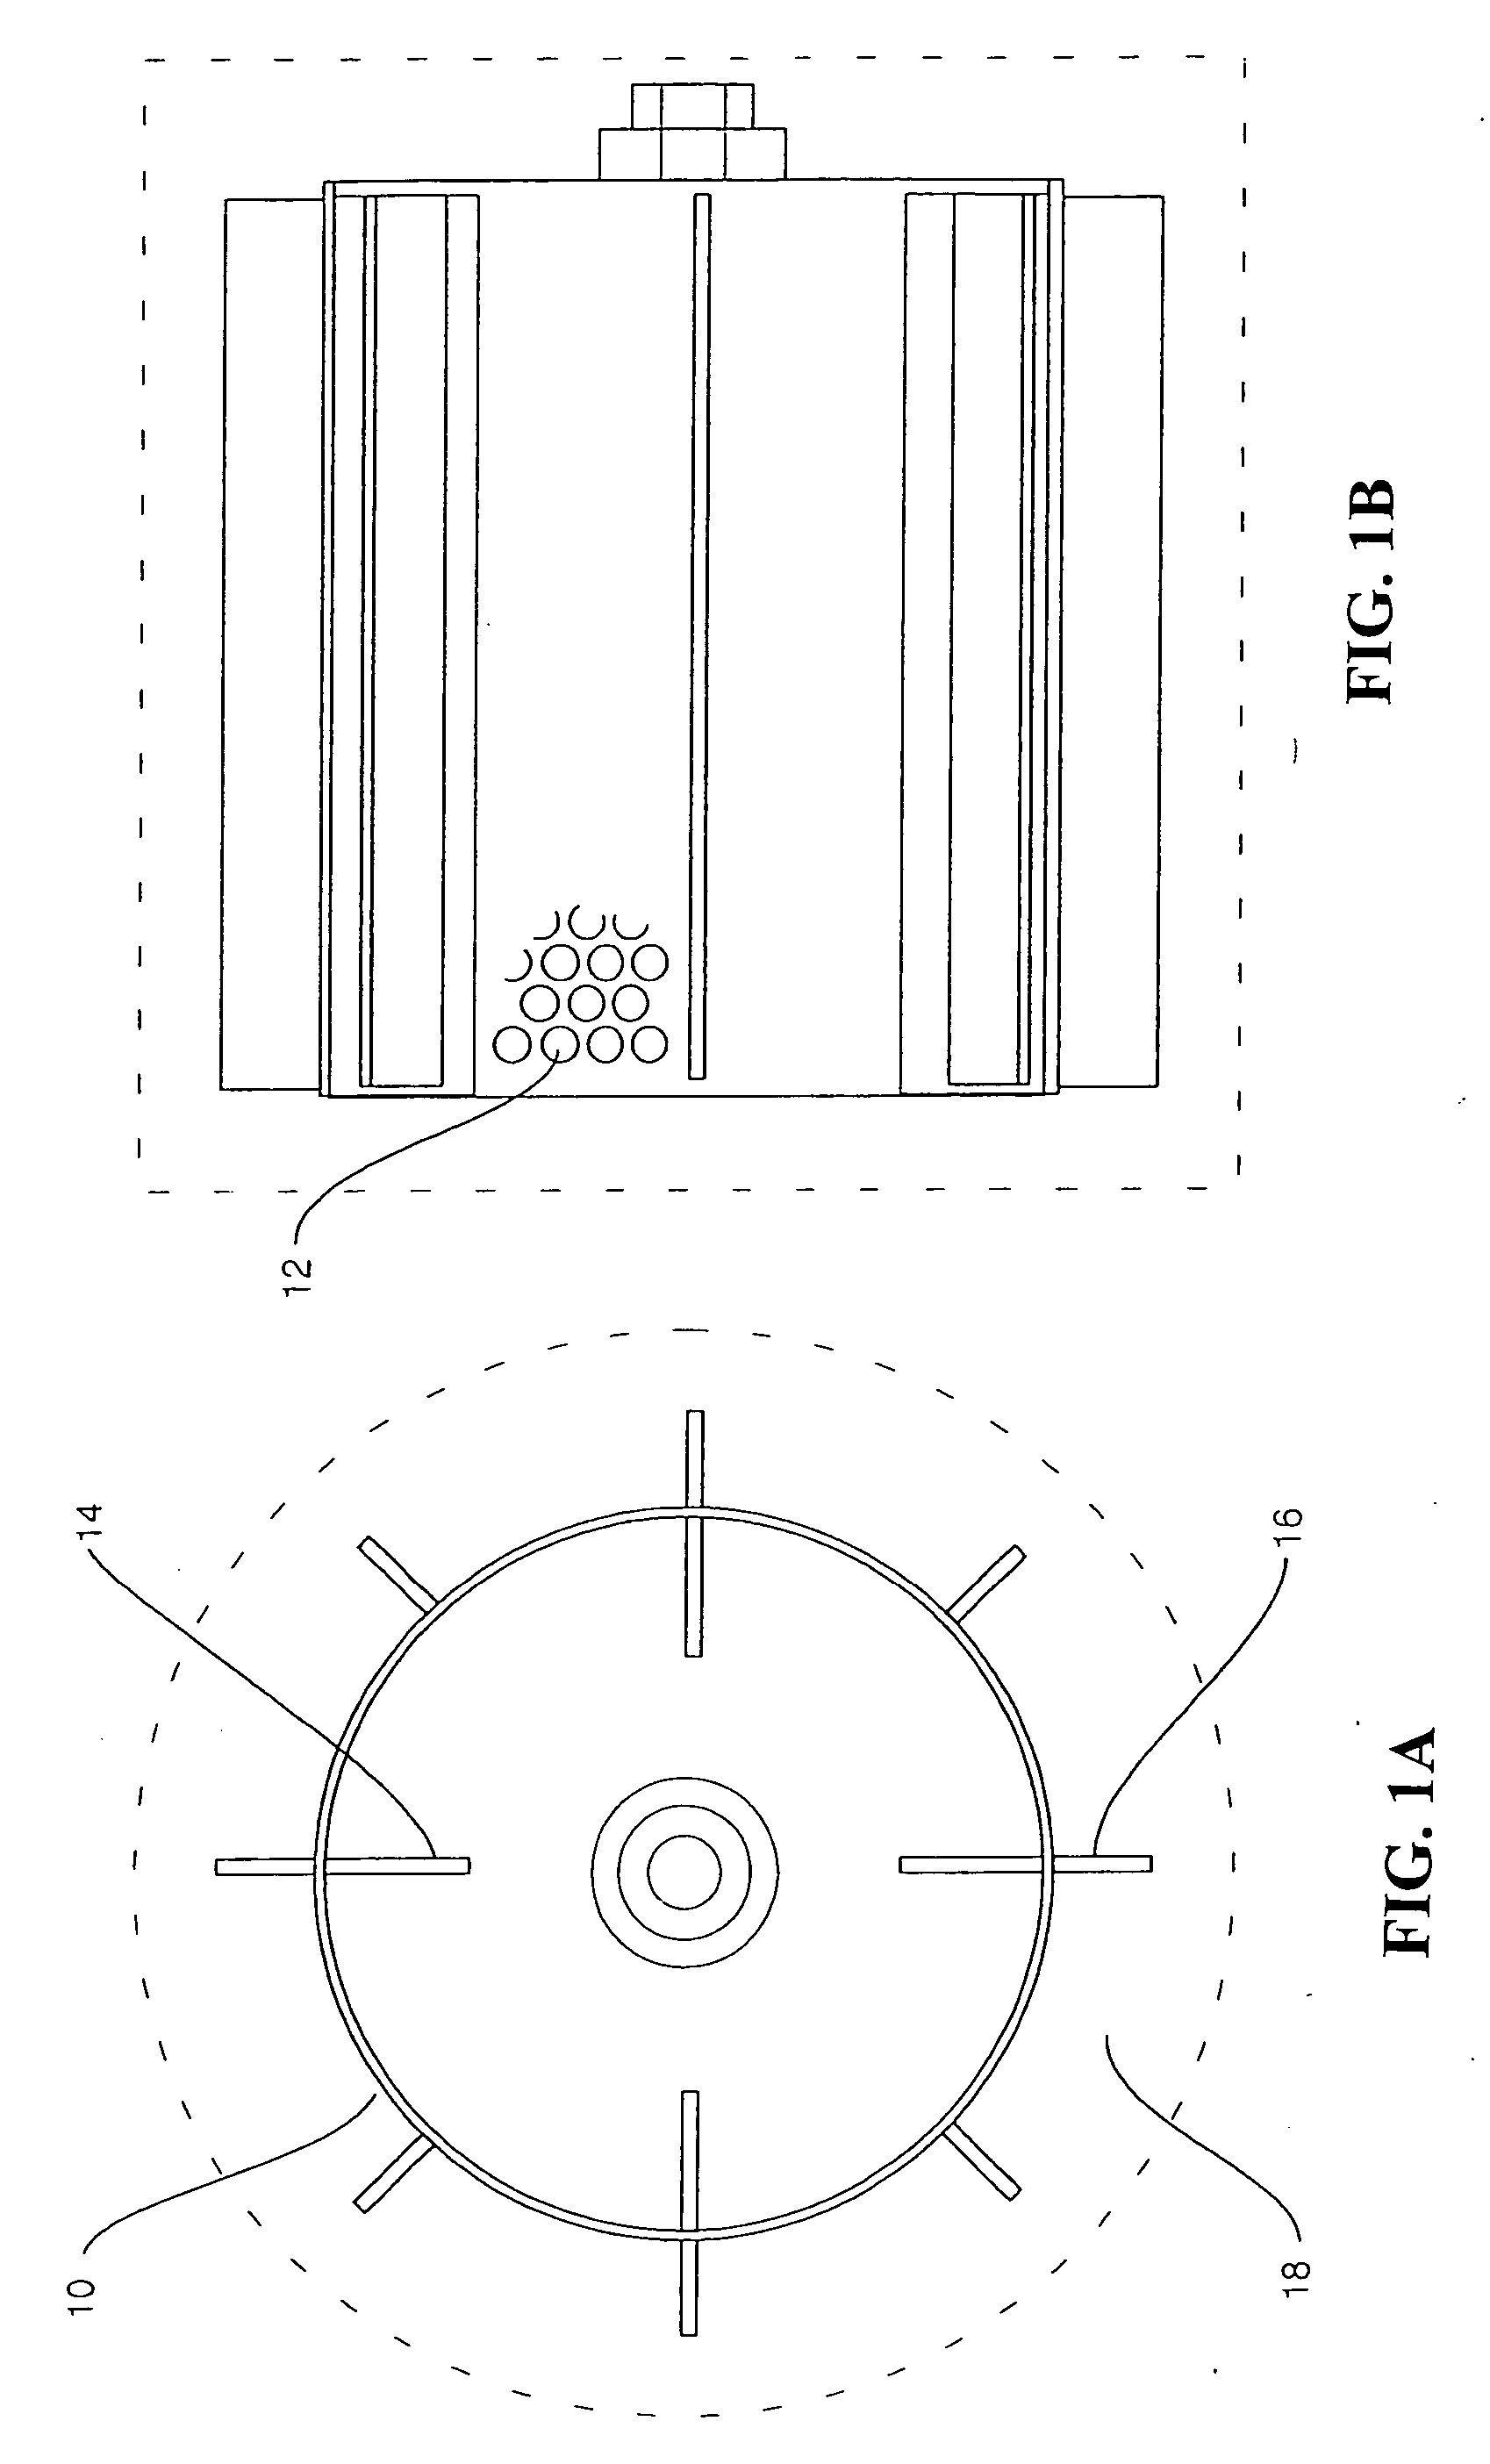 Method and apparatus for roasting coffee beans by means of concentrated solar thermal energy